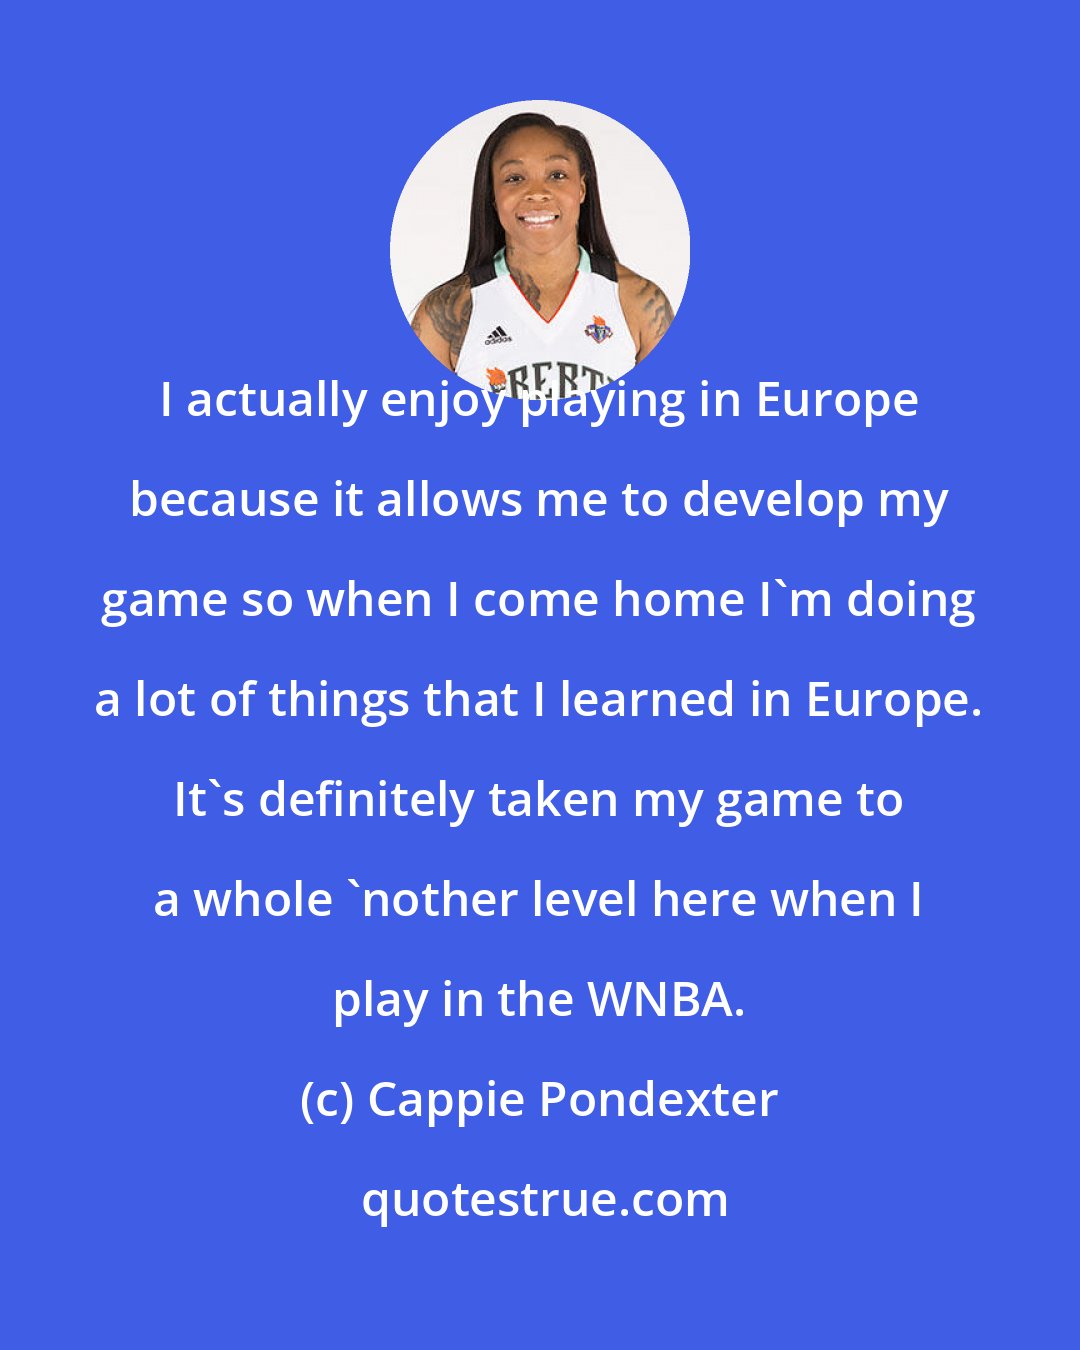 Cappie Pondexter: I actually enjoy playing in Europe because it allows me to develop my game so when I come home I'm doing a lot of things that I learned in Europe. It's definitely taken my game to a whole 'nother level here when I play in the WNBA.